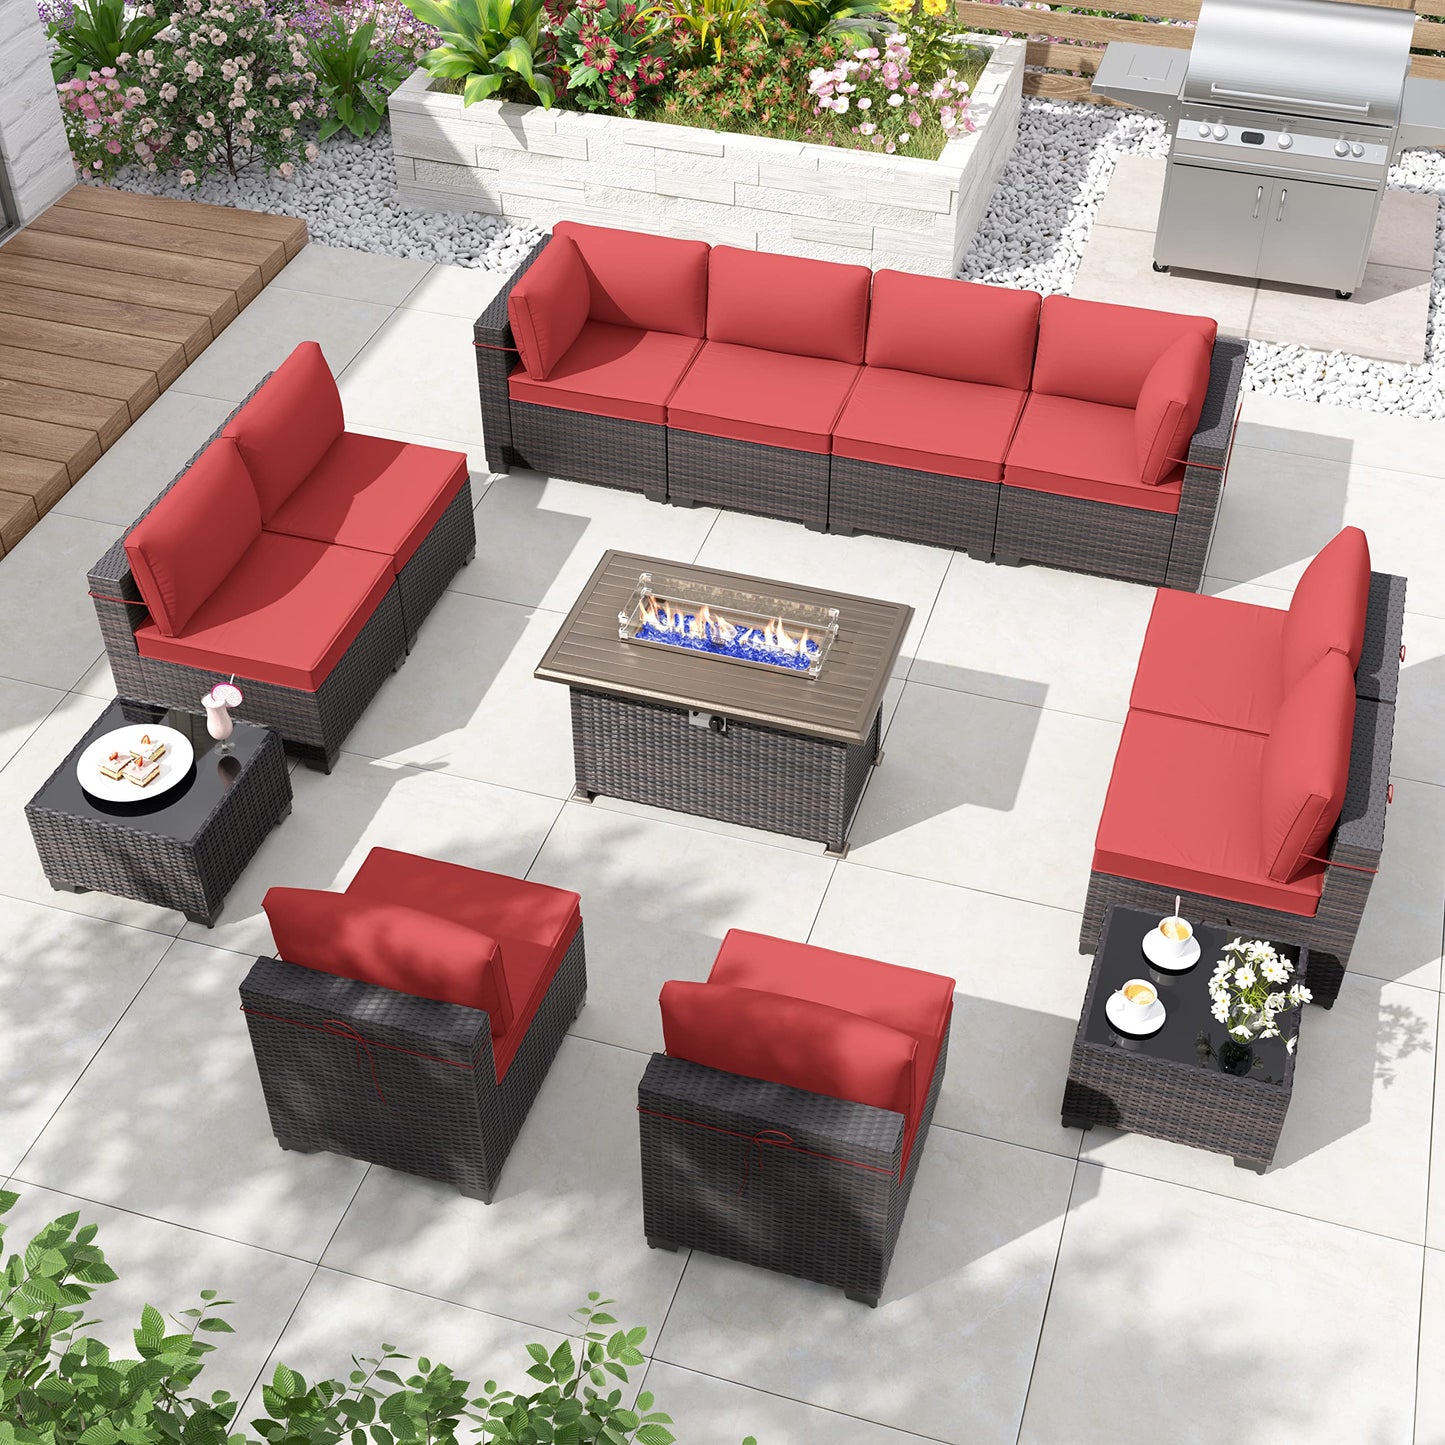 ALAULM 13 Pieces Patio Furniture Set with Fire Pit Table Outdoor Sectional Sofa Sets Outdoor Furniture - Red